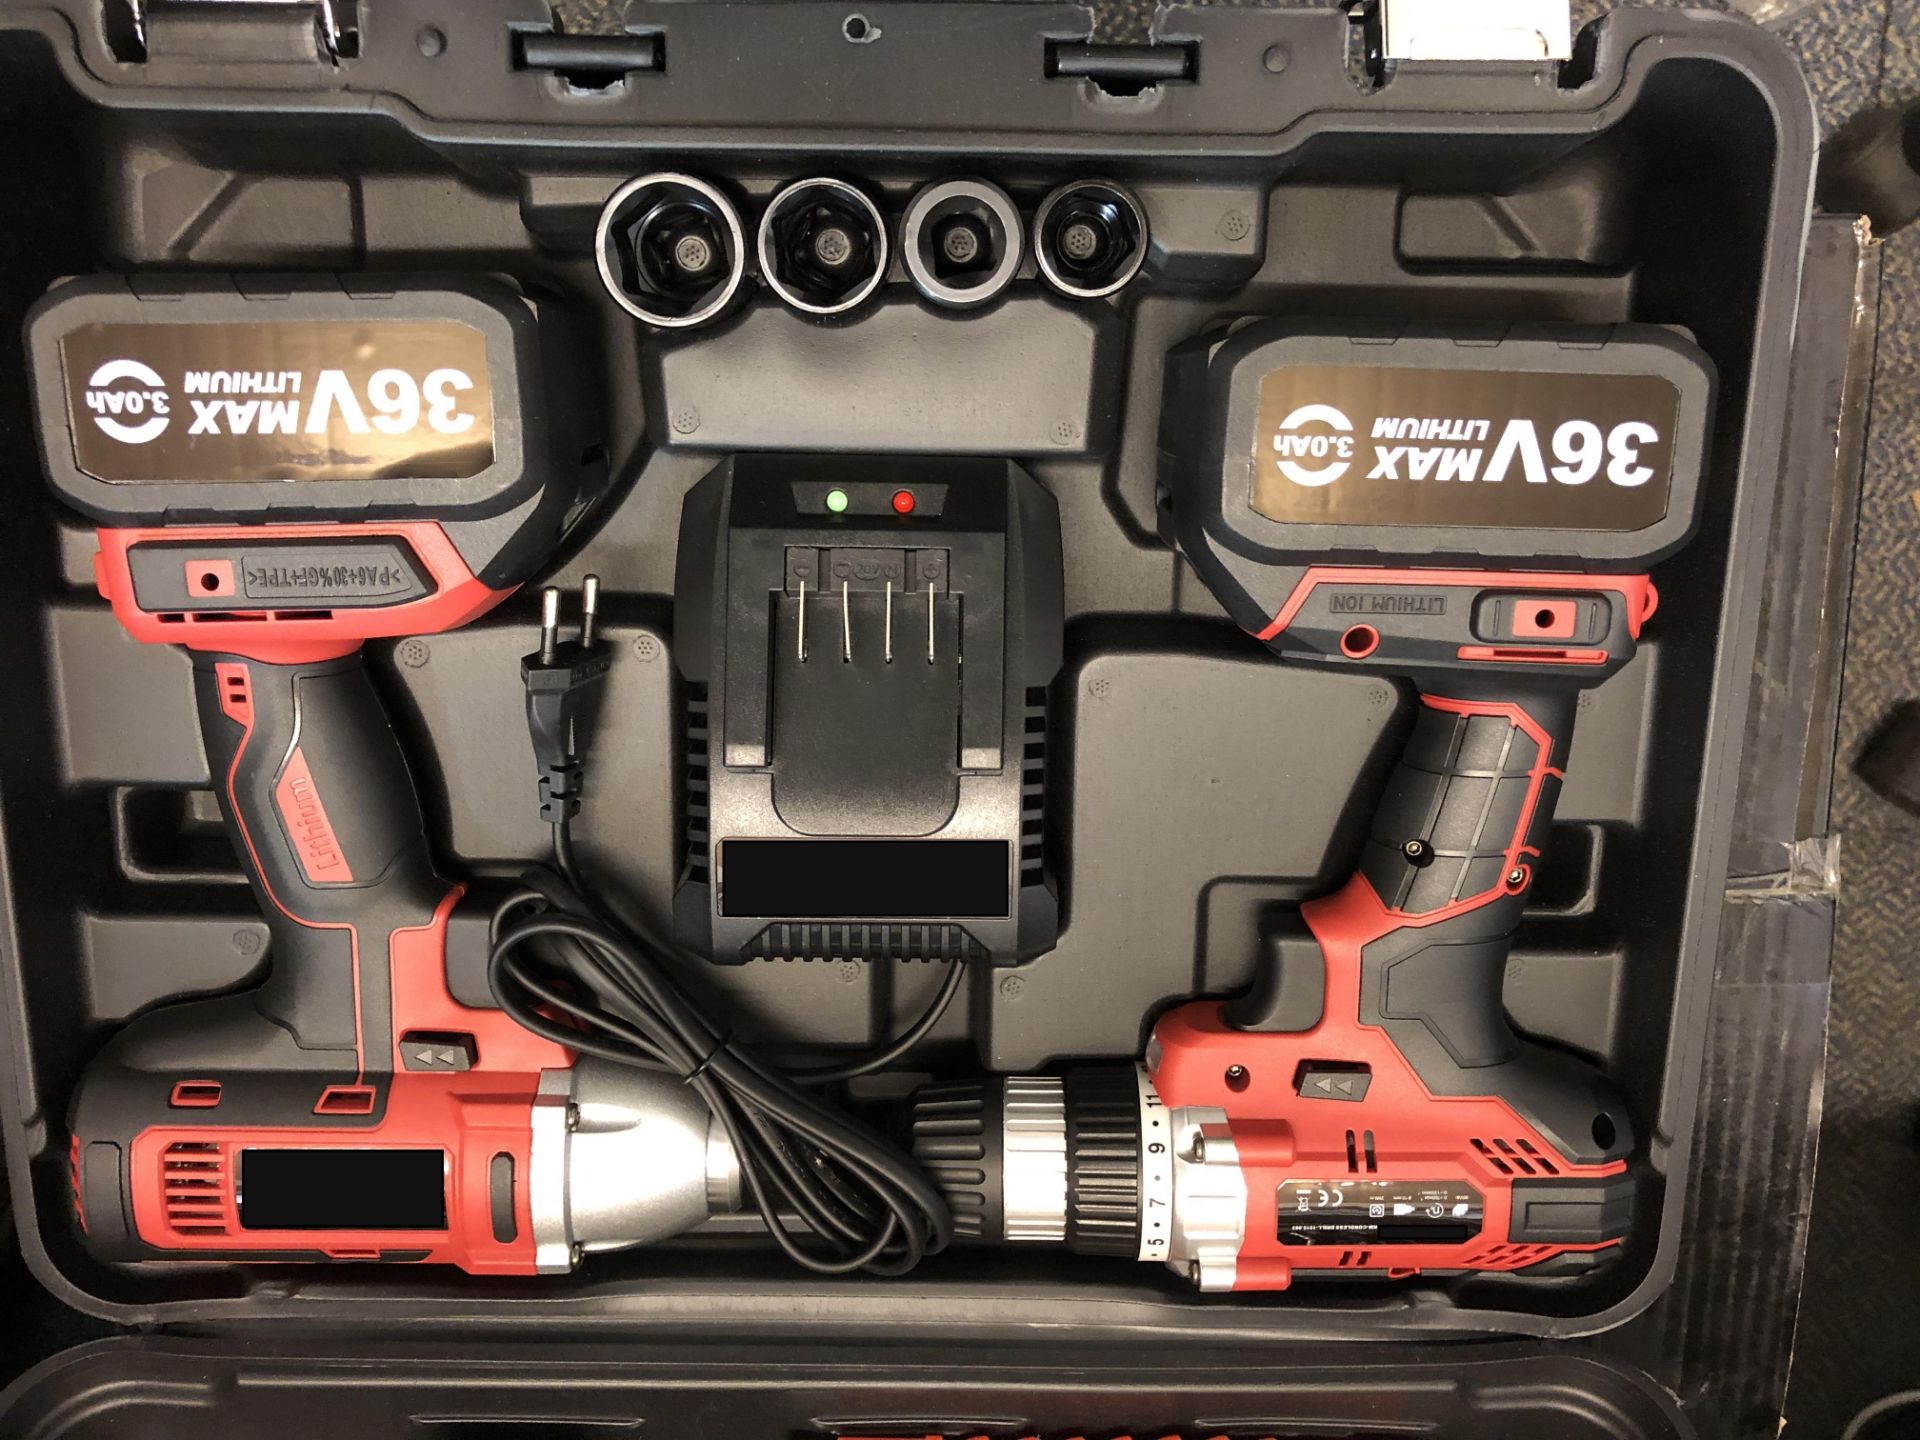 V Brand New 36V Twin Pack Cordless Drill/Driver And Cordless Impact Driver - 1 Hour Charge - 3.0Ah - Image 4 of 4